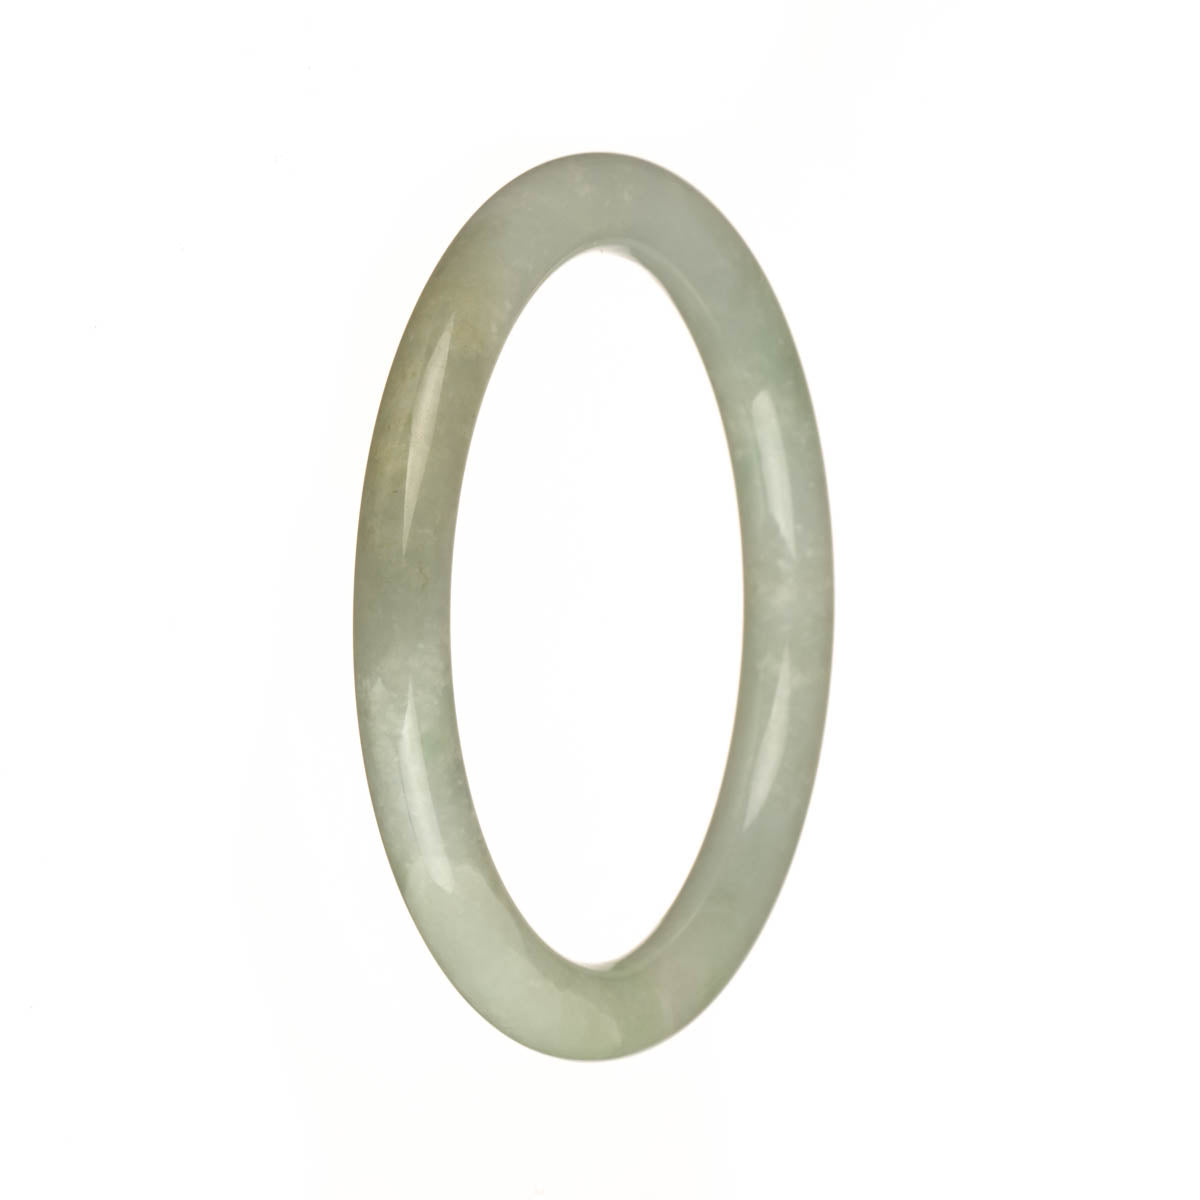 A small round jade bracelet with a natural white color and green spots.